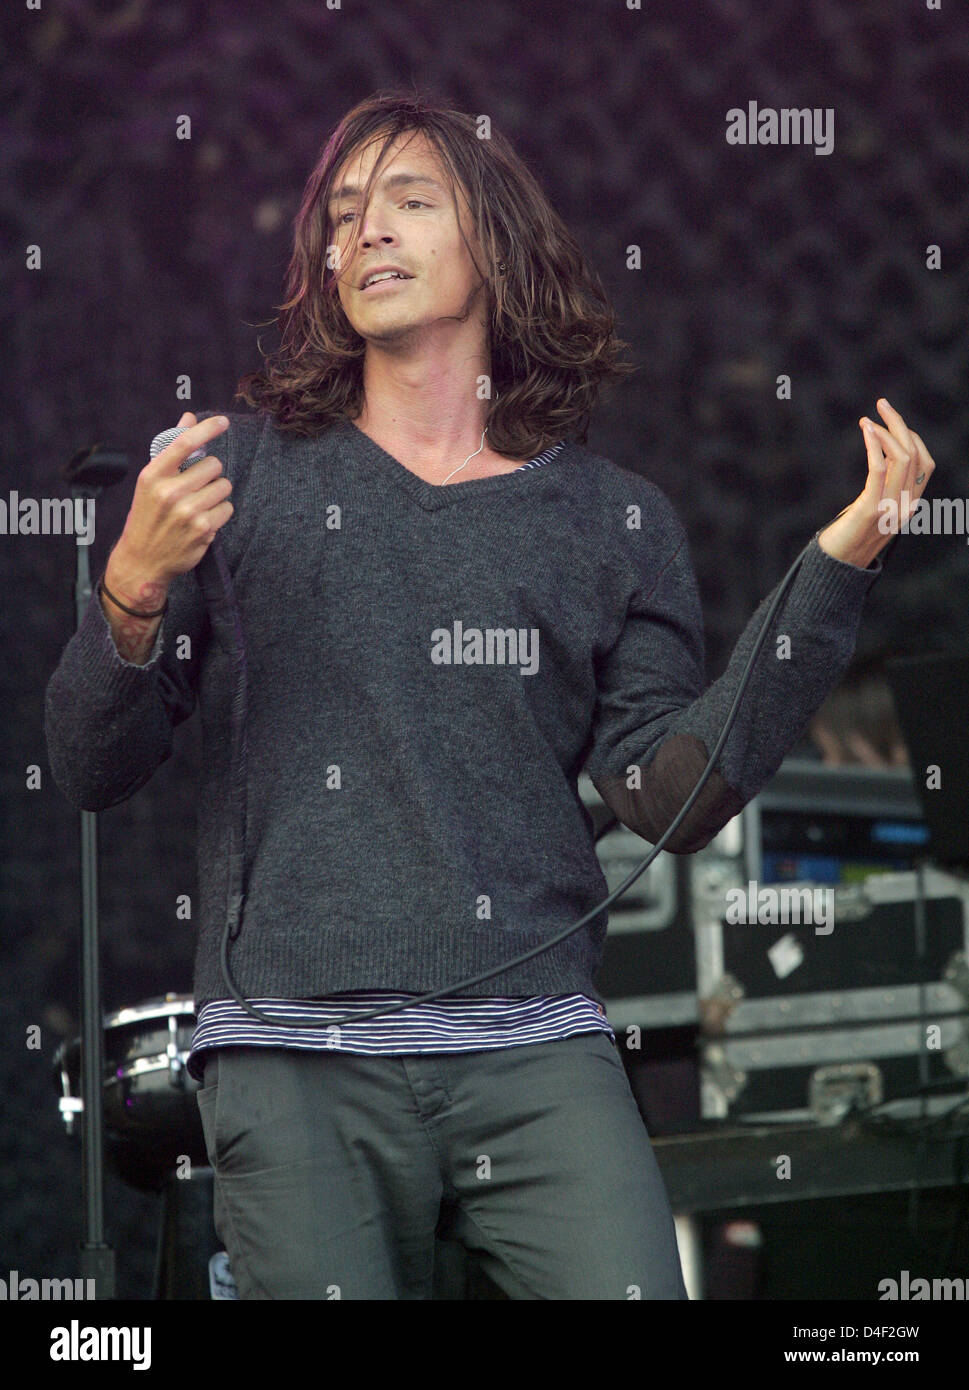 Lead singer of US crossover band 'Incubus', Brandon Boyd, performs at the annual open air music festival 'Rock im Park' in Nuremberg, Germany, 07 June 2008. The three-day event with 60,000 visitors and 90 performing bands ends on 08 June. Photo: Daniel Karmann Stock Photo